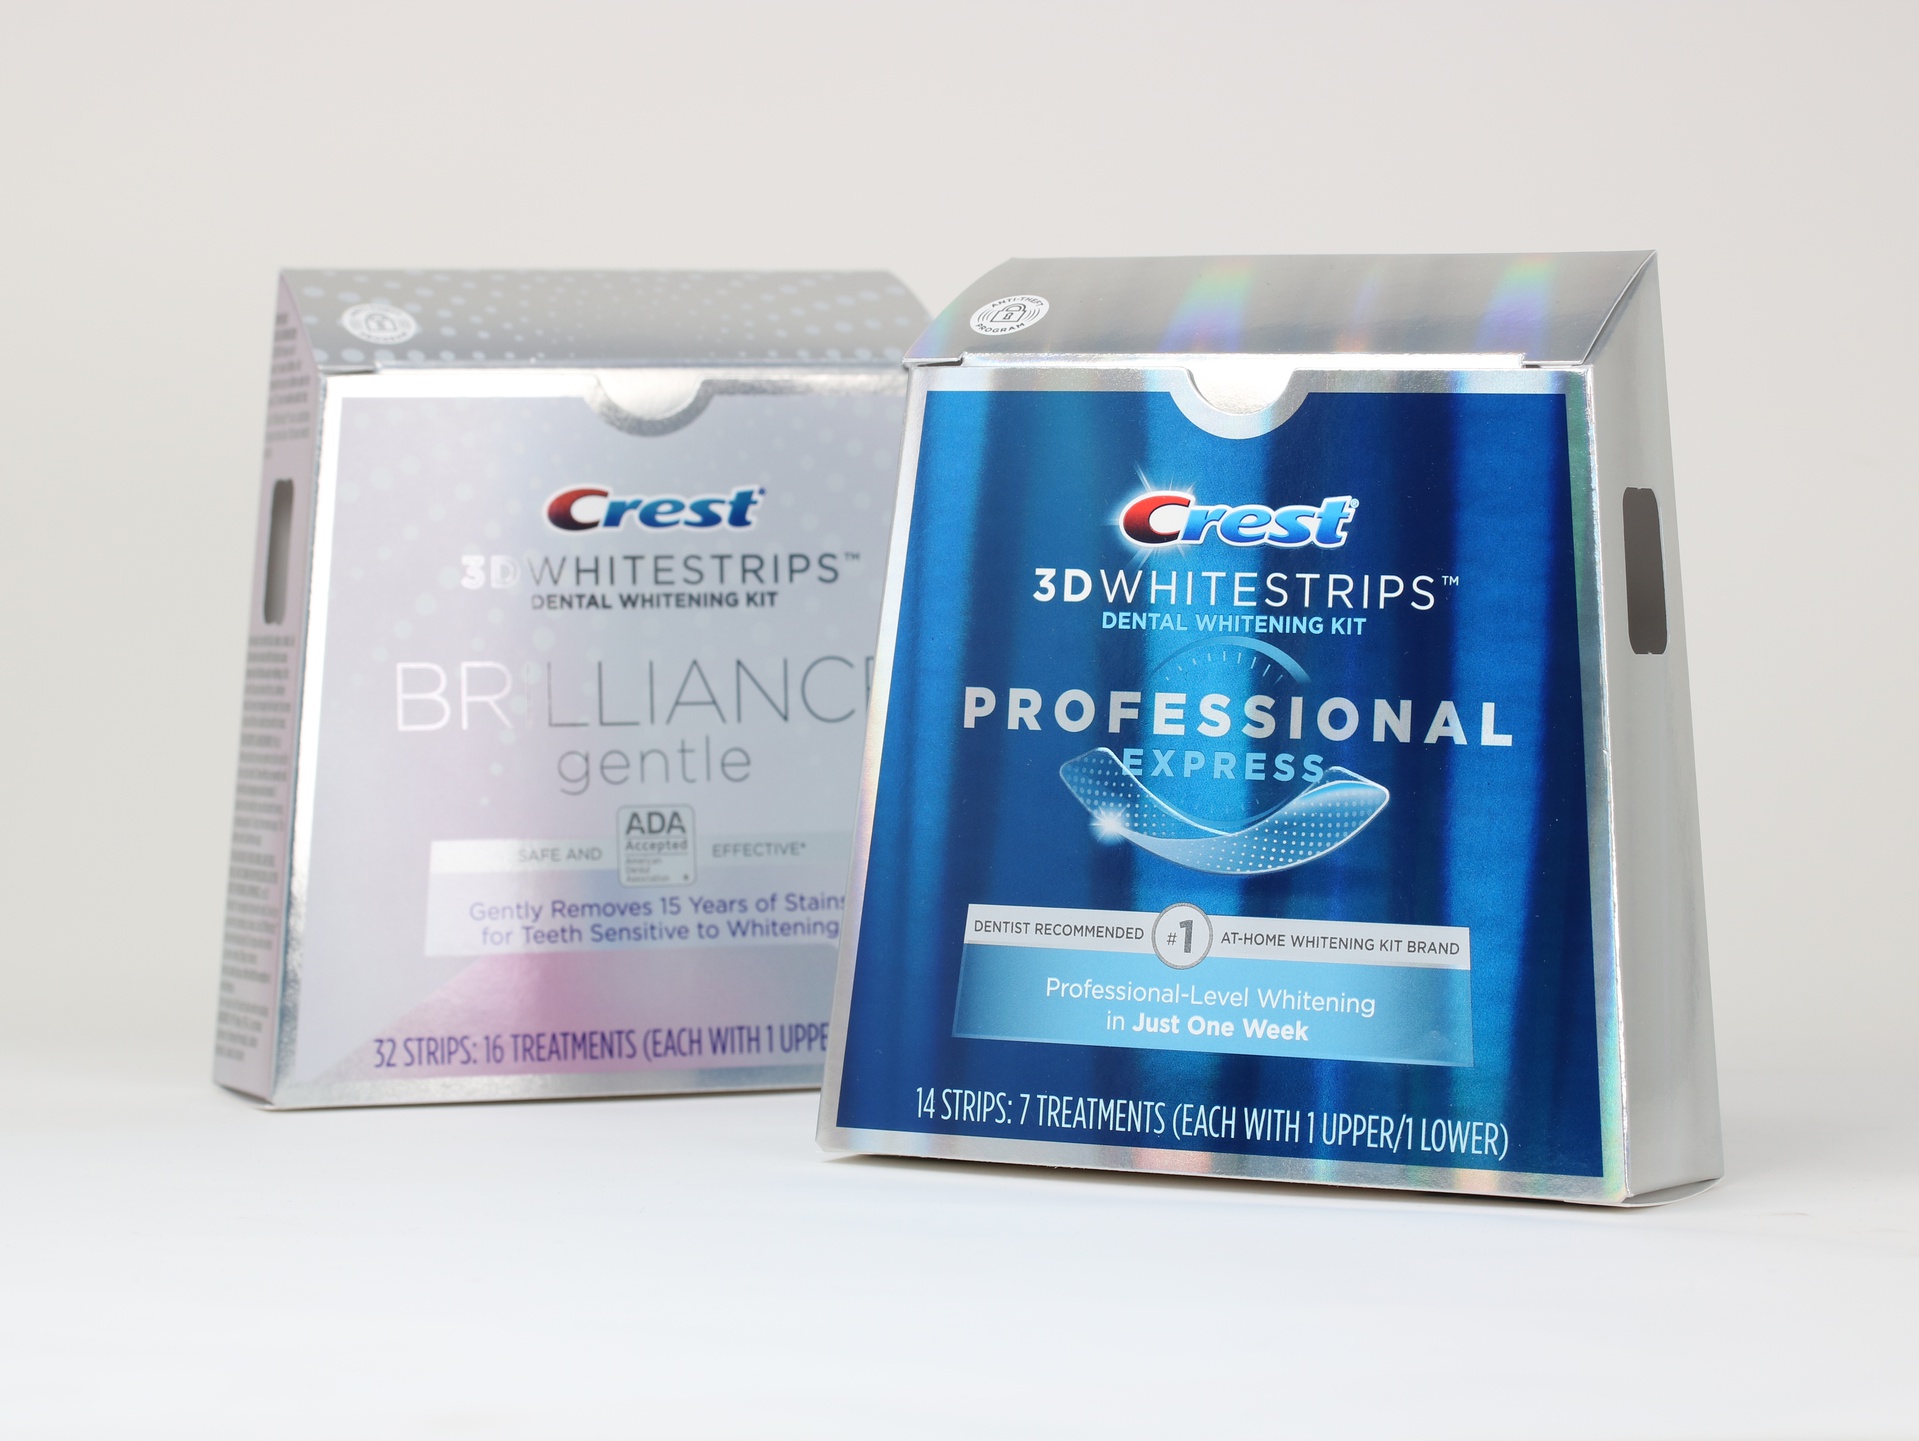 Crest 3D Whitestrips packaging features cold foil.